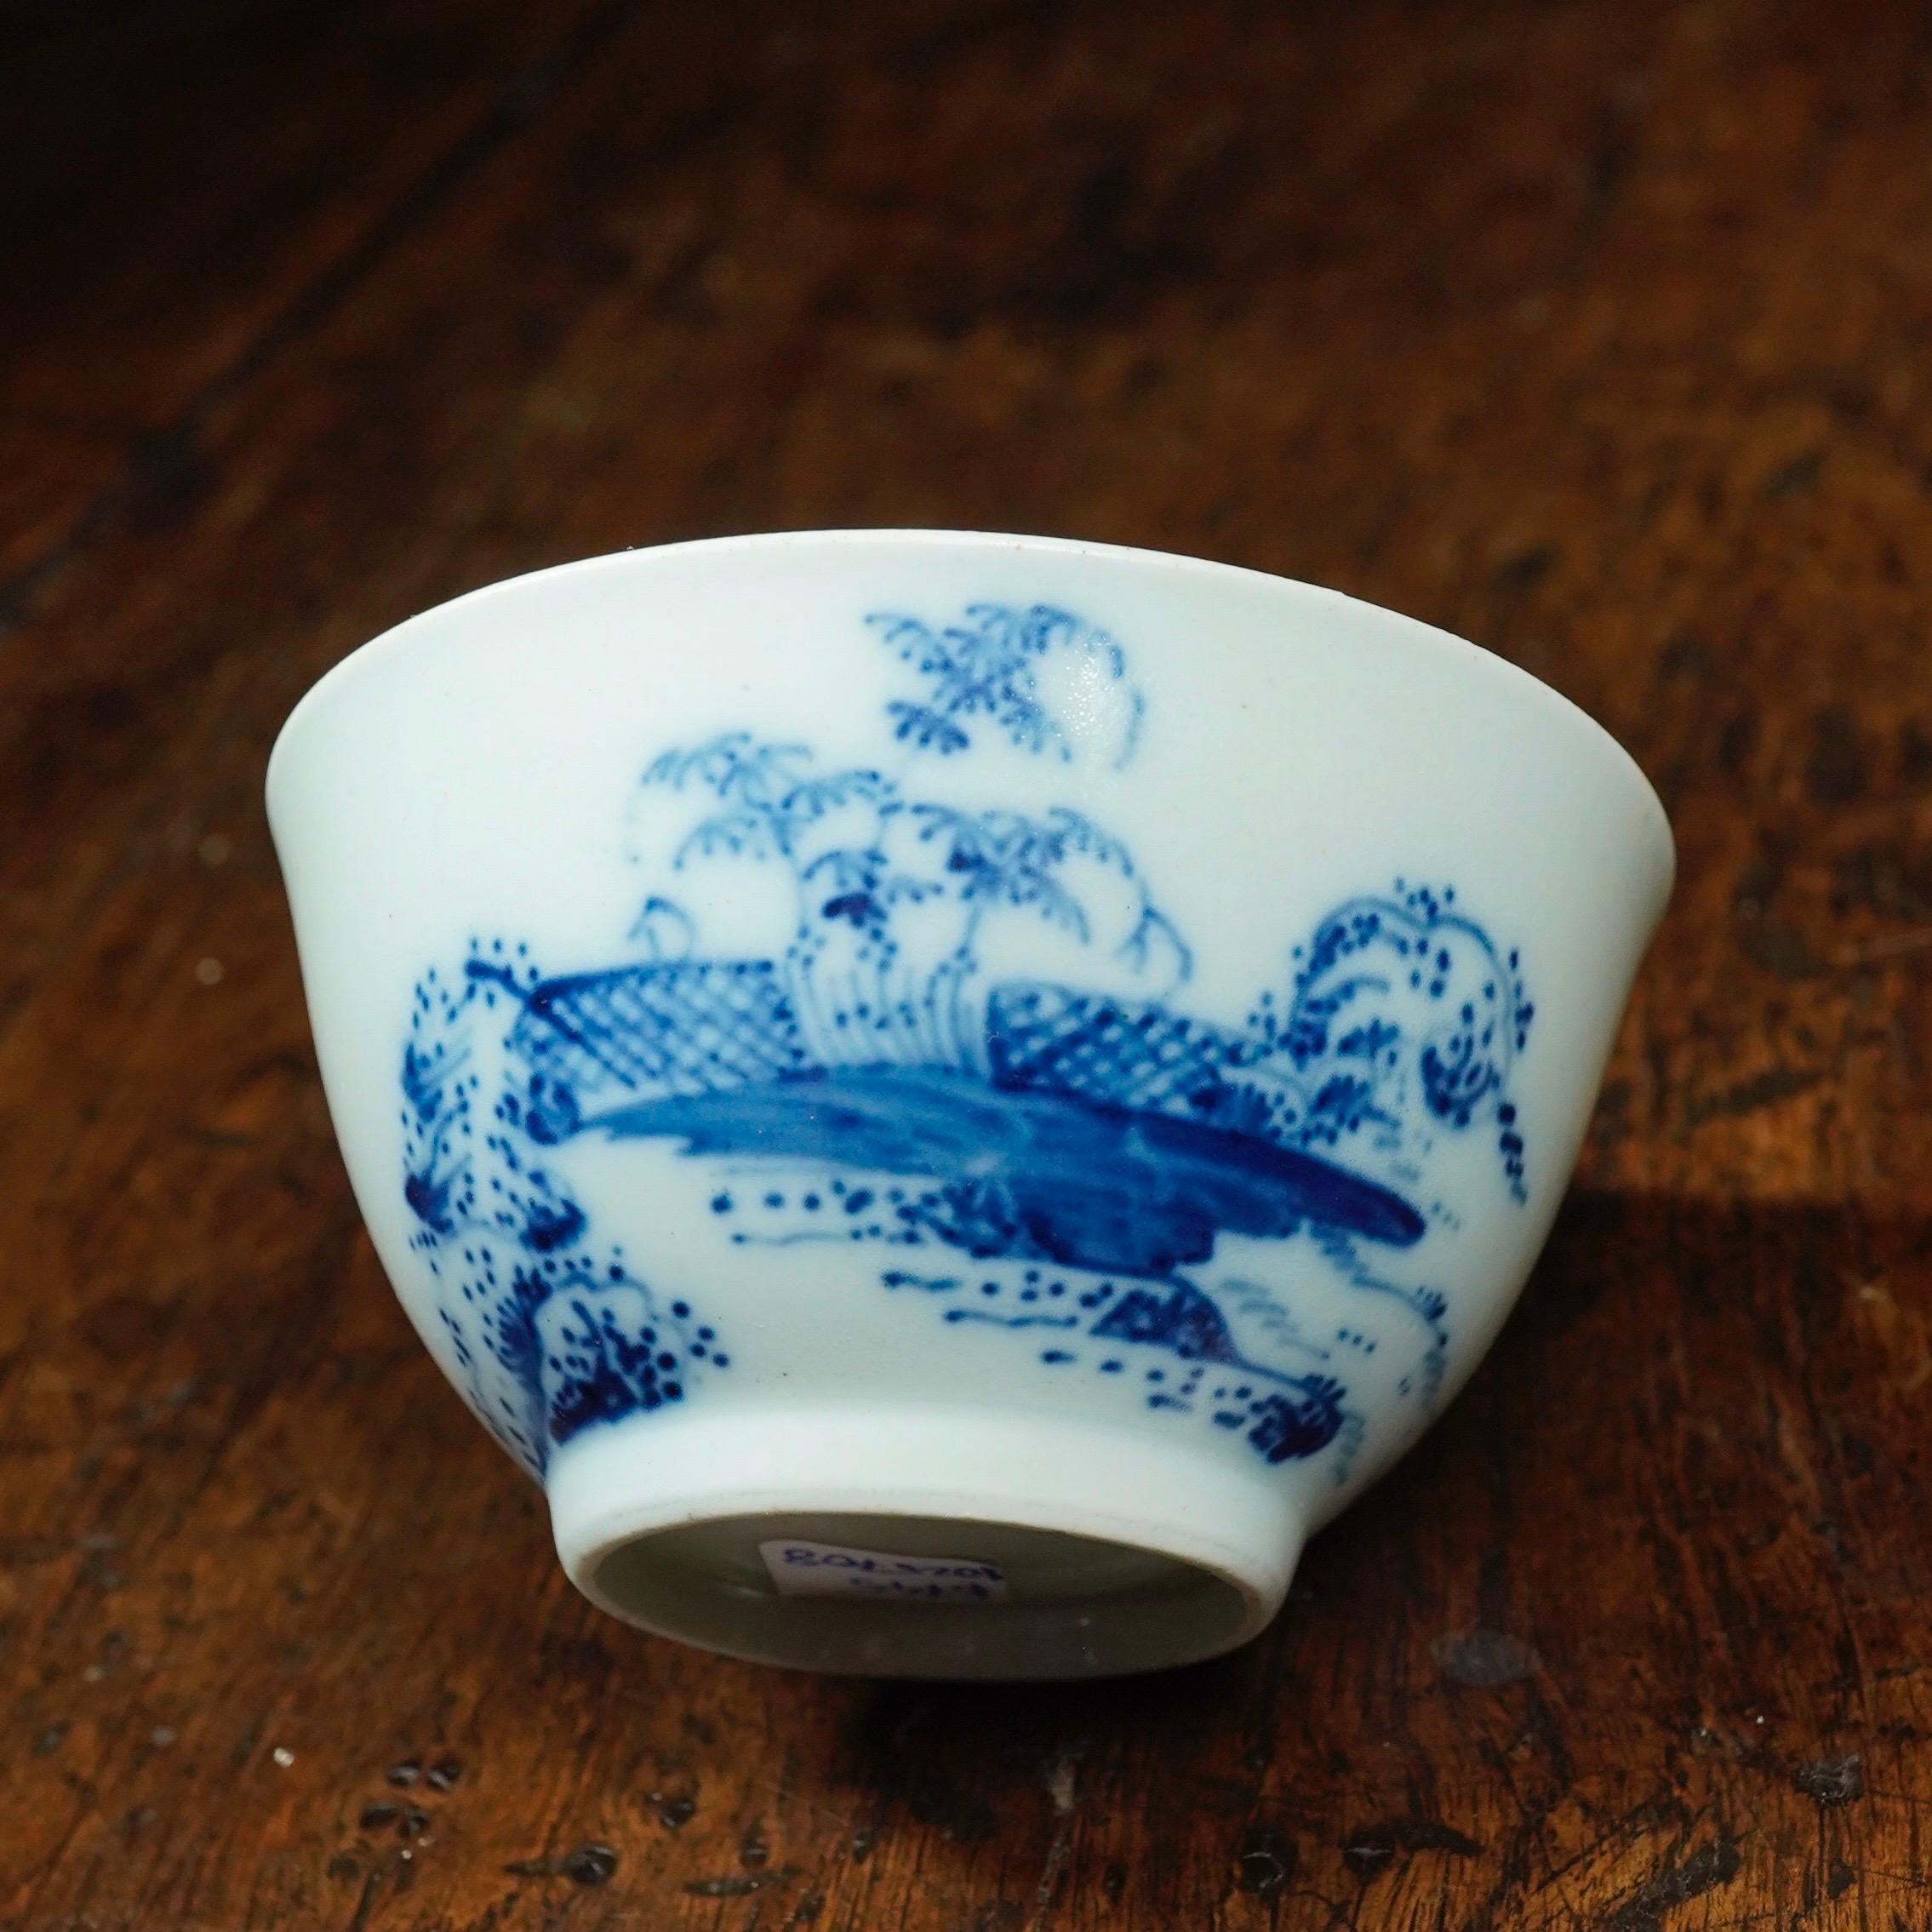 Chaffers Liverpool Teabowl 'Trellis Fence' Pattern in Underglaze Blue circa 1760 In Good Condition For Sale In Geelong, Victoria